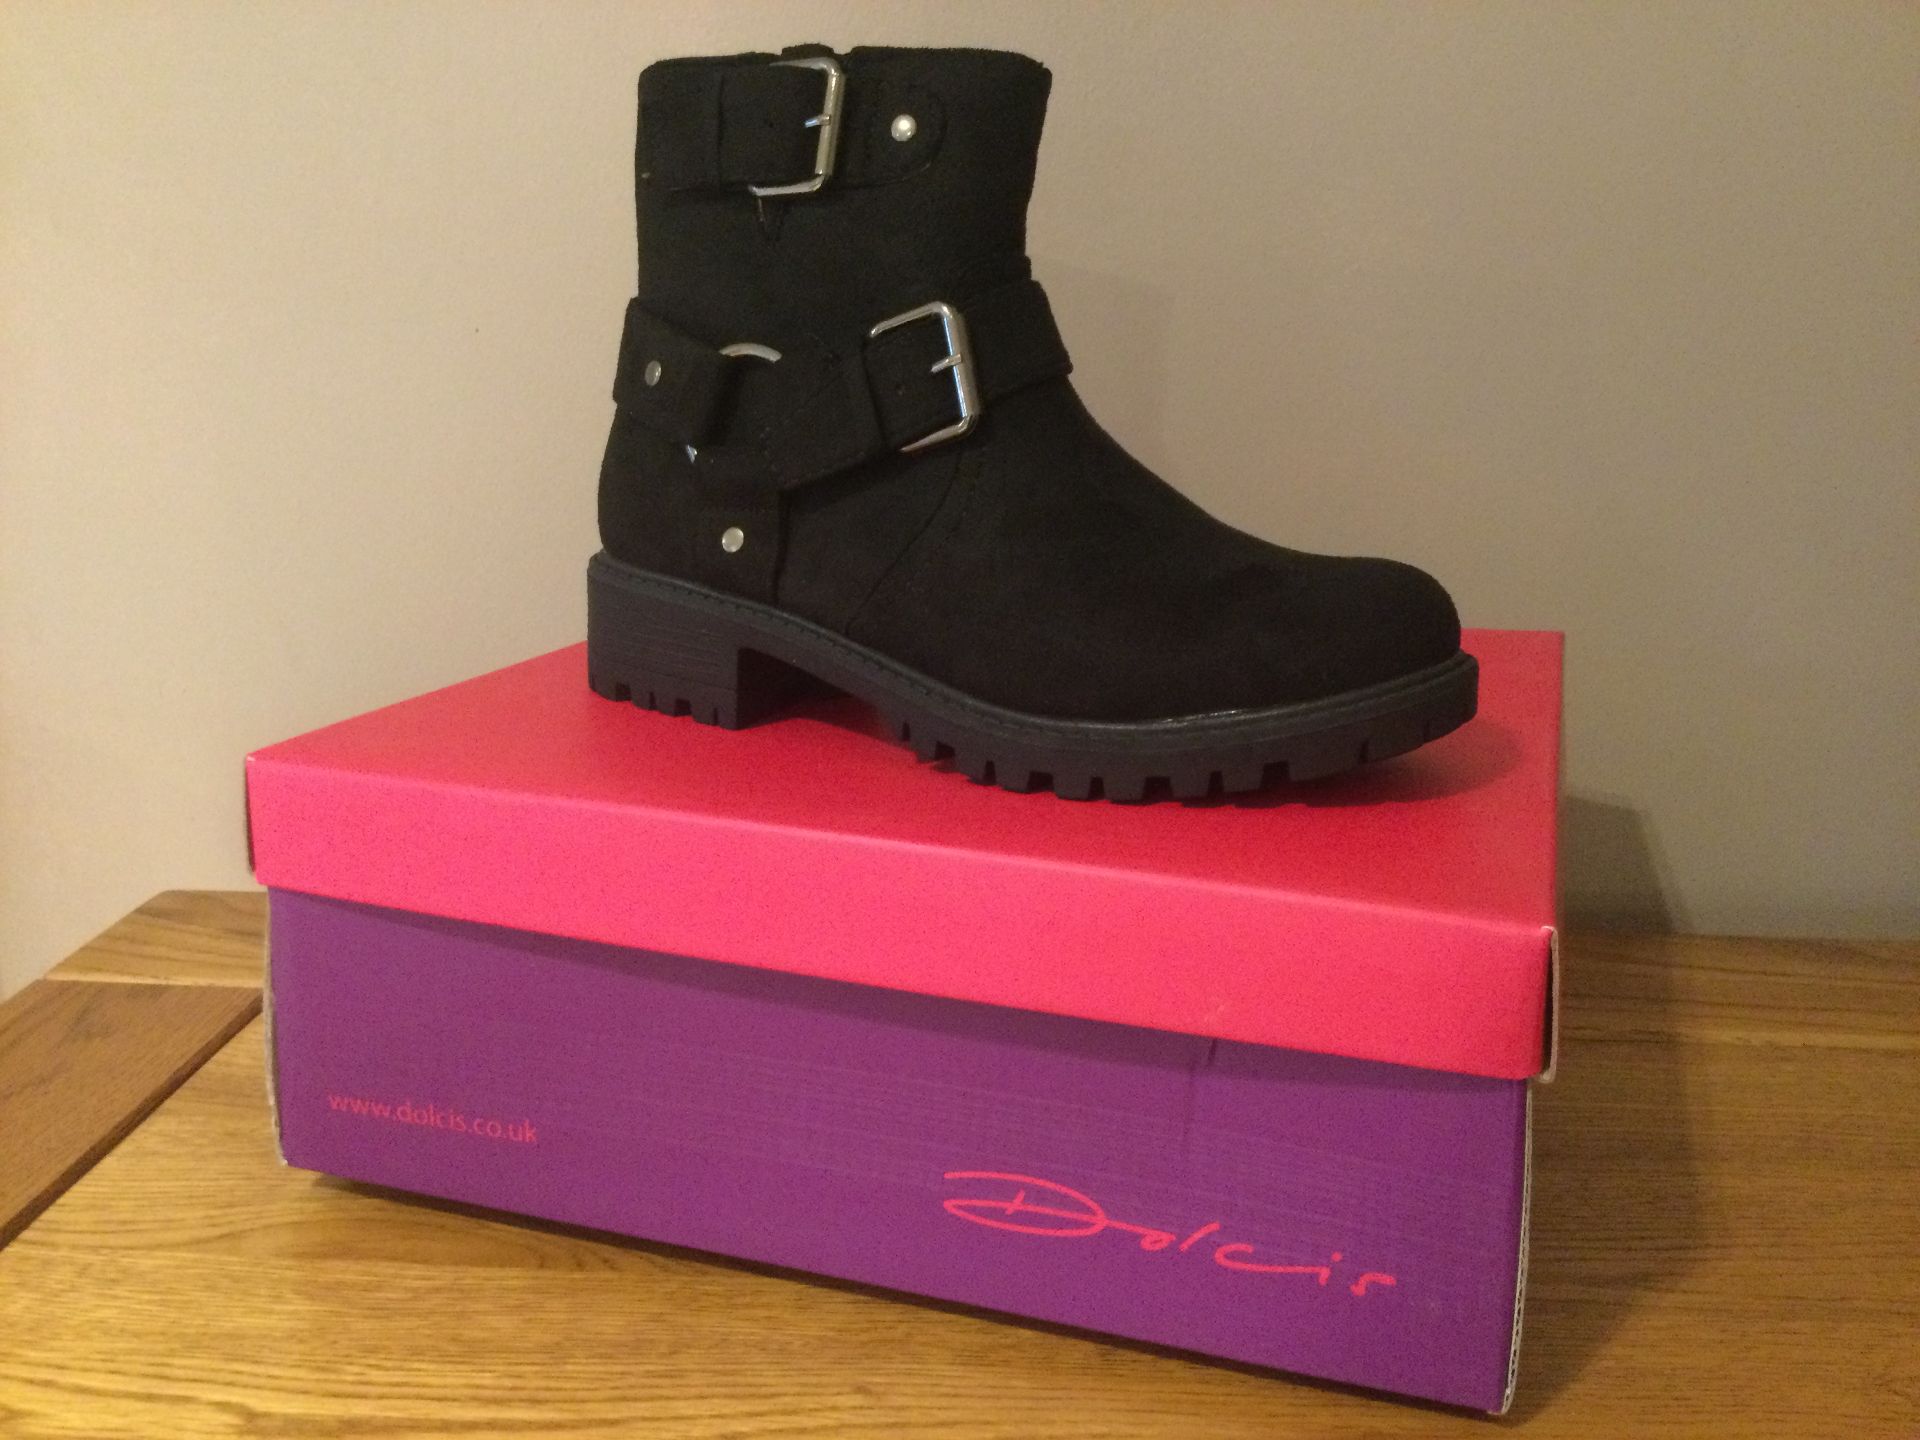 Dolcis “Davis” Ankle Boots, Size 4, Black - New RRP £49.00 - Image 2 of 5